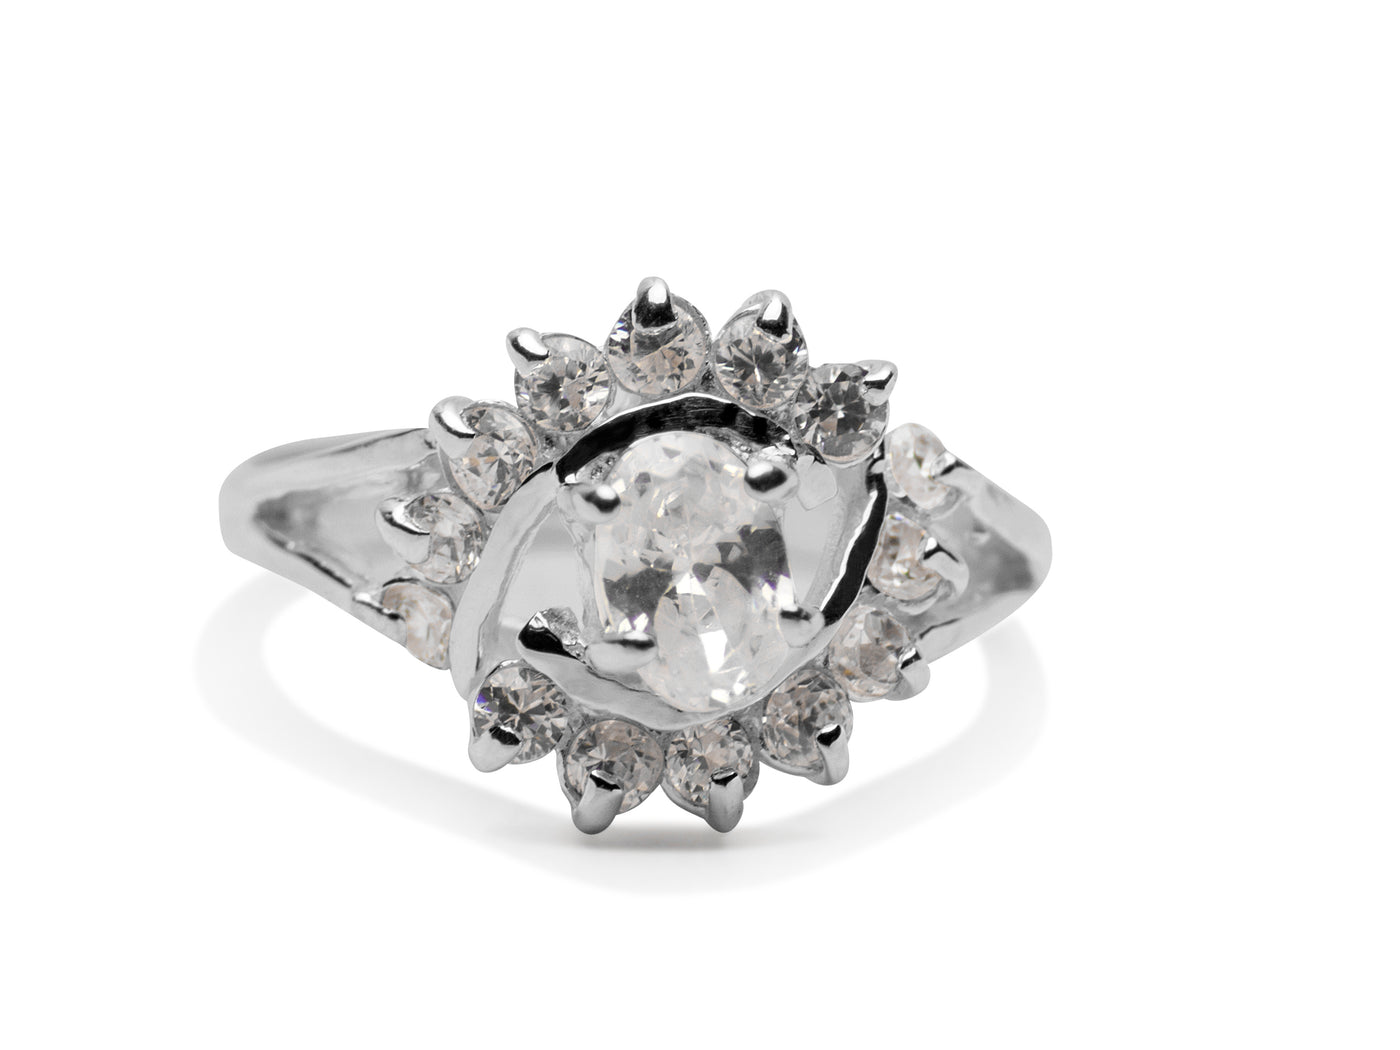 Distinctive Sterling Silver & Cubic Zirconia Ring